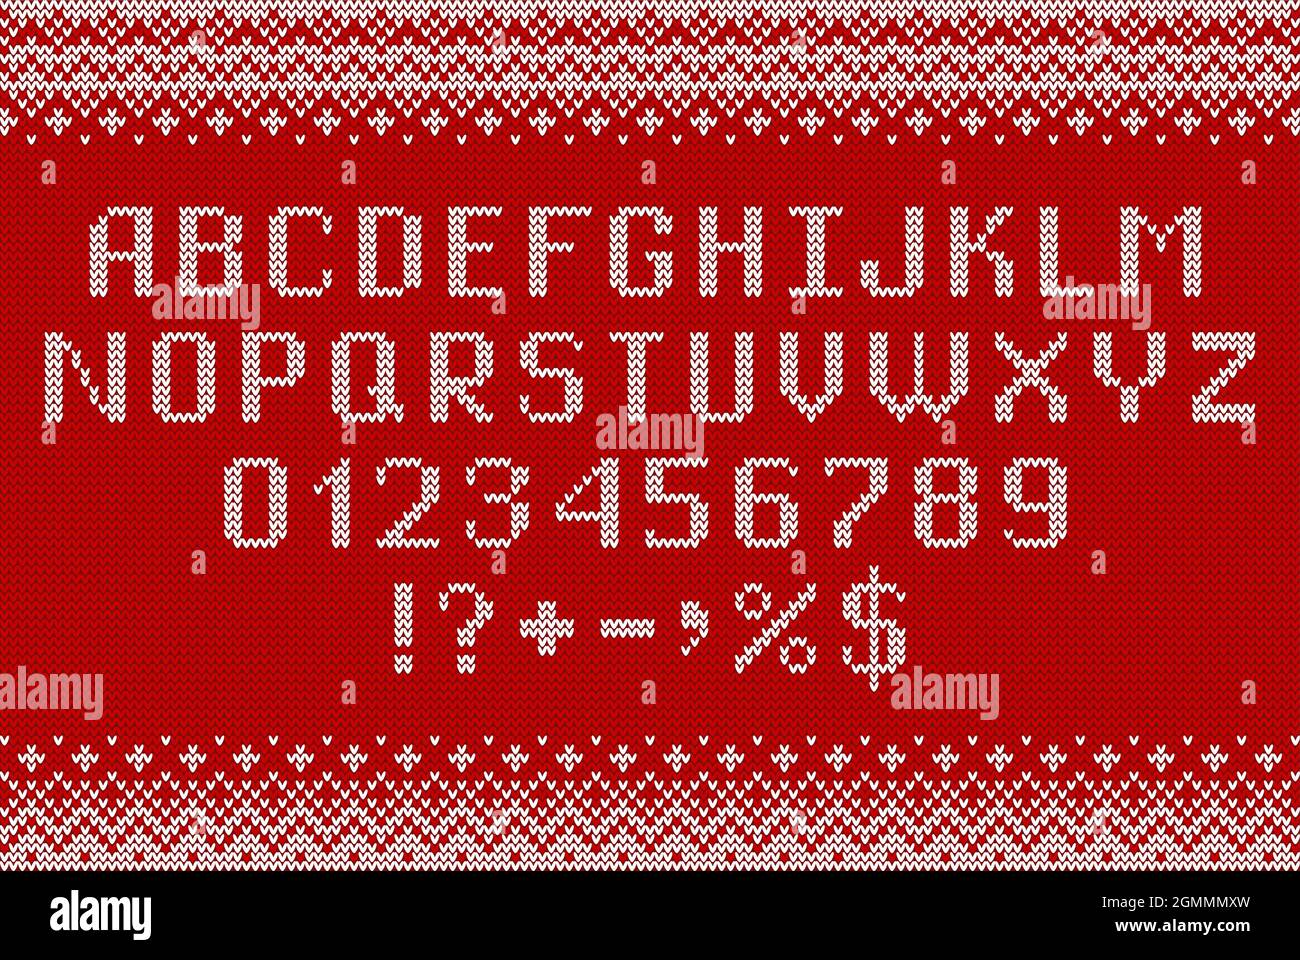 Sweater font. Knitted letters, numbers and symbols for Christmas,  New Year or winter season. Alphabet and  ornaments on red knit background. Typeface Stock Vector